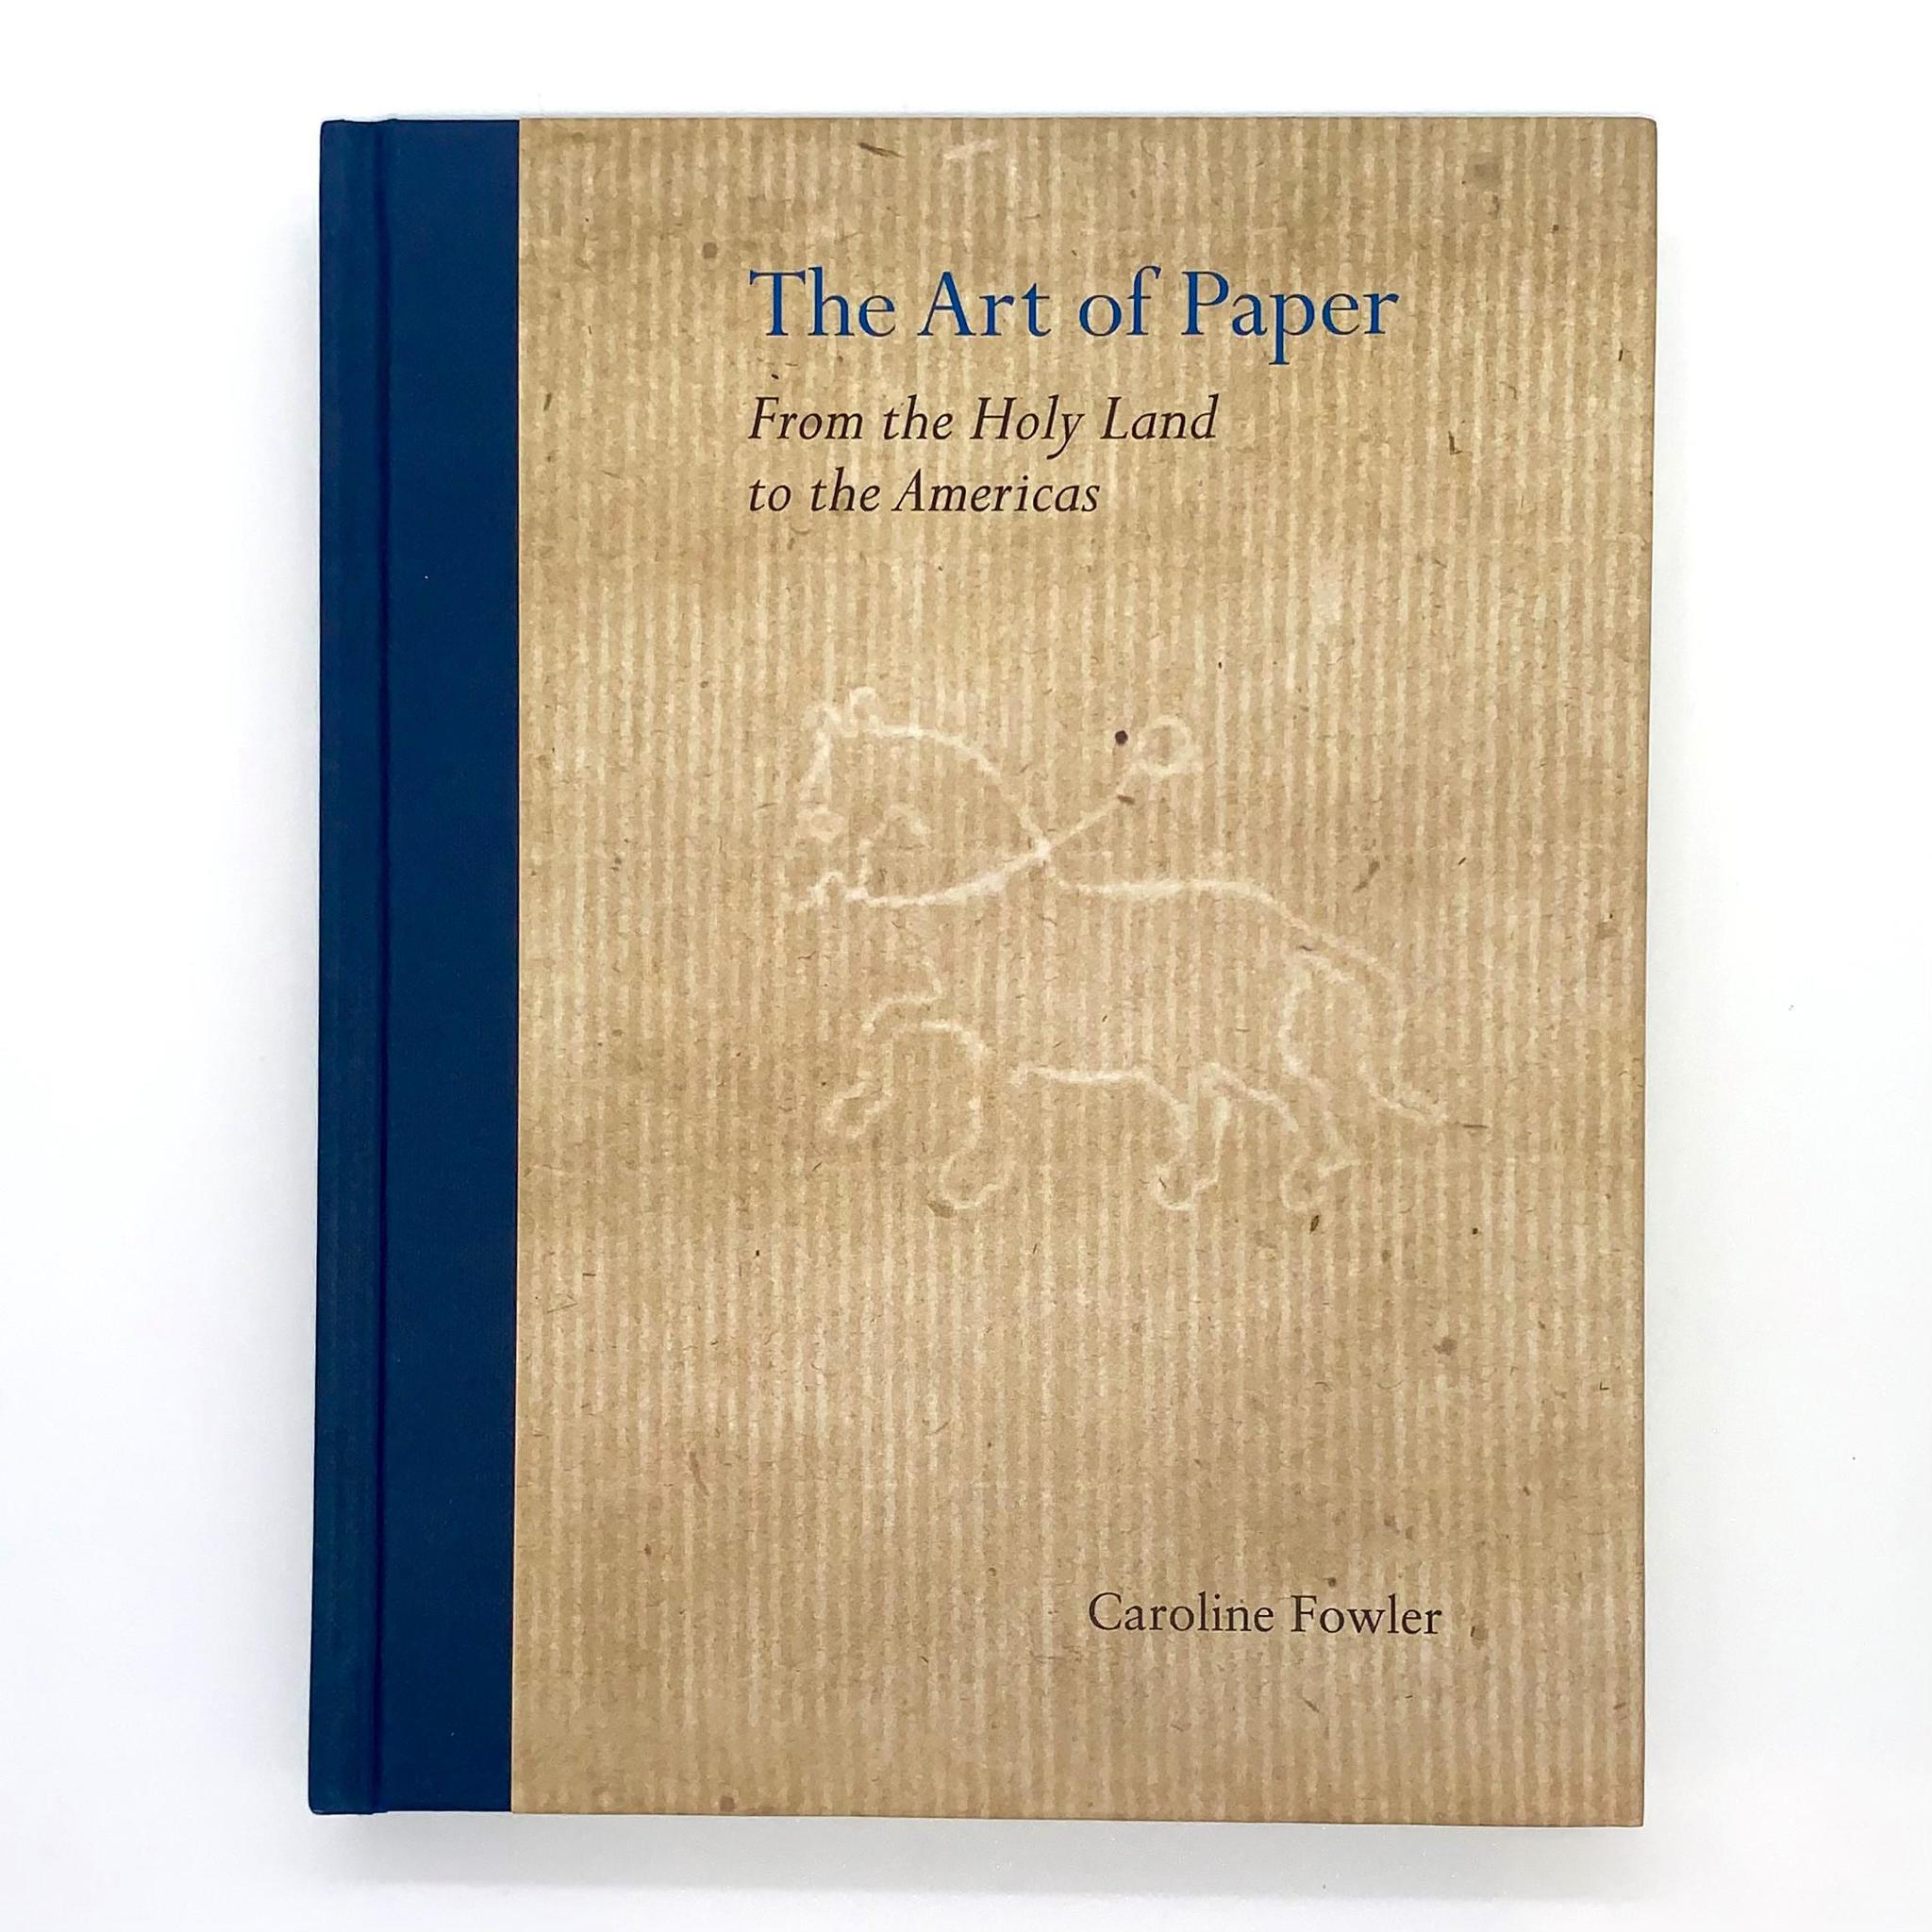 The Art of Paper